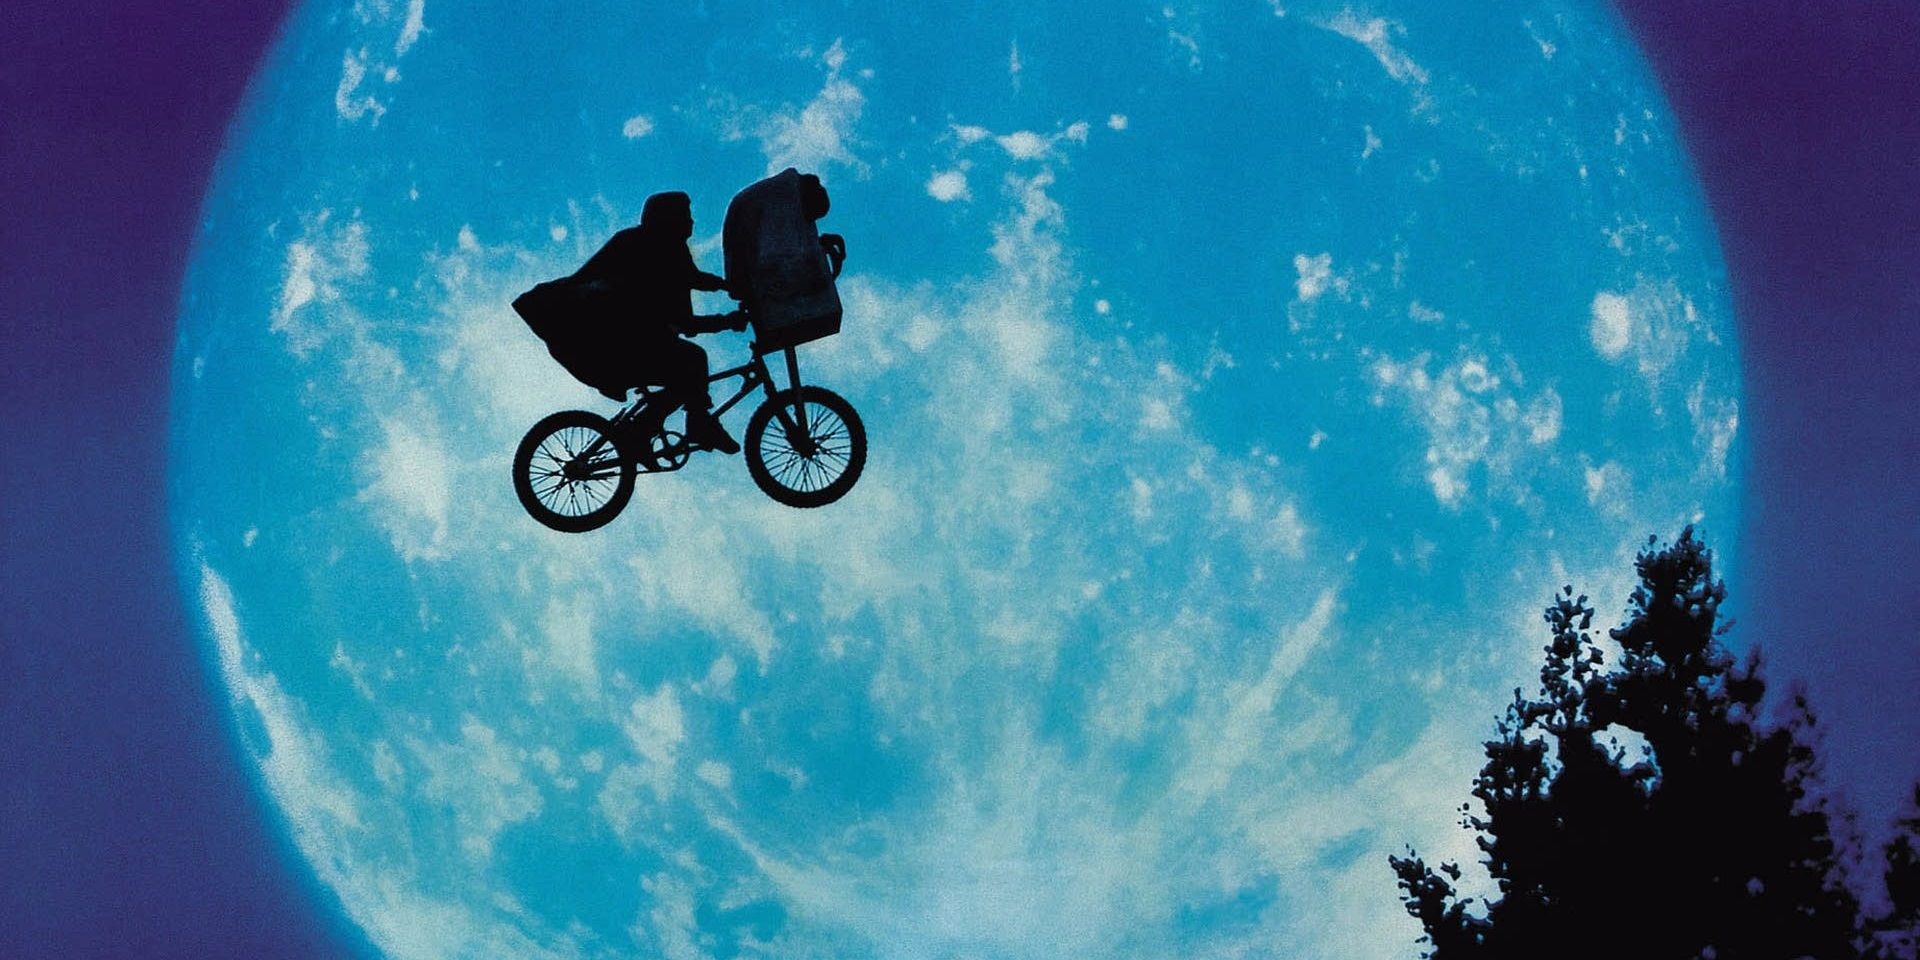 Elliott and ET fly past the Moon in ET the Extra-Terrestrial